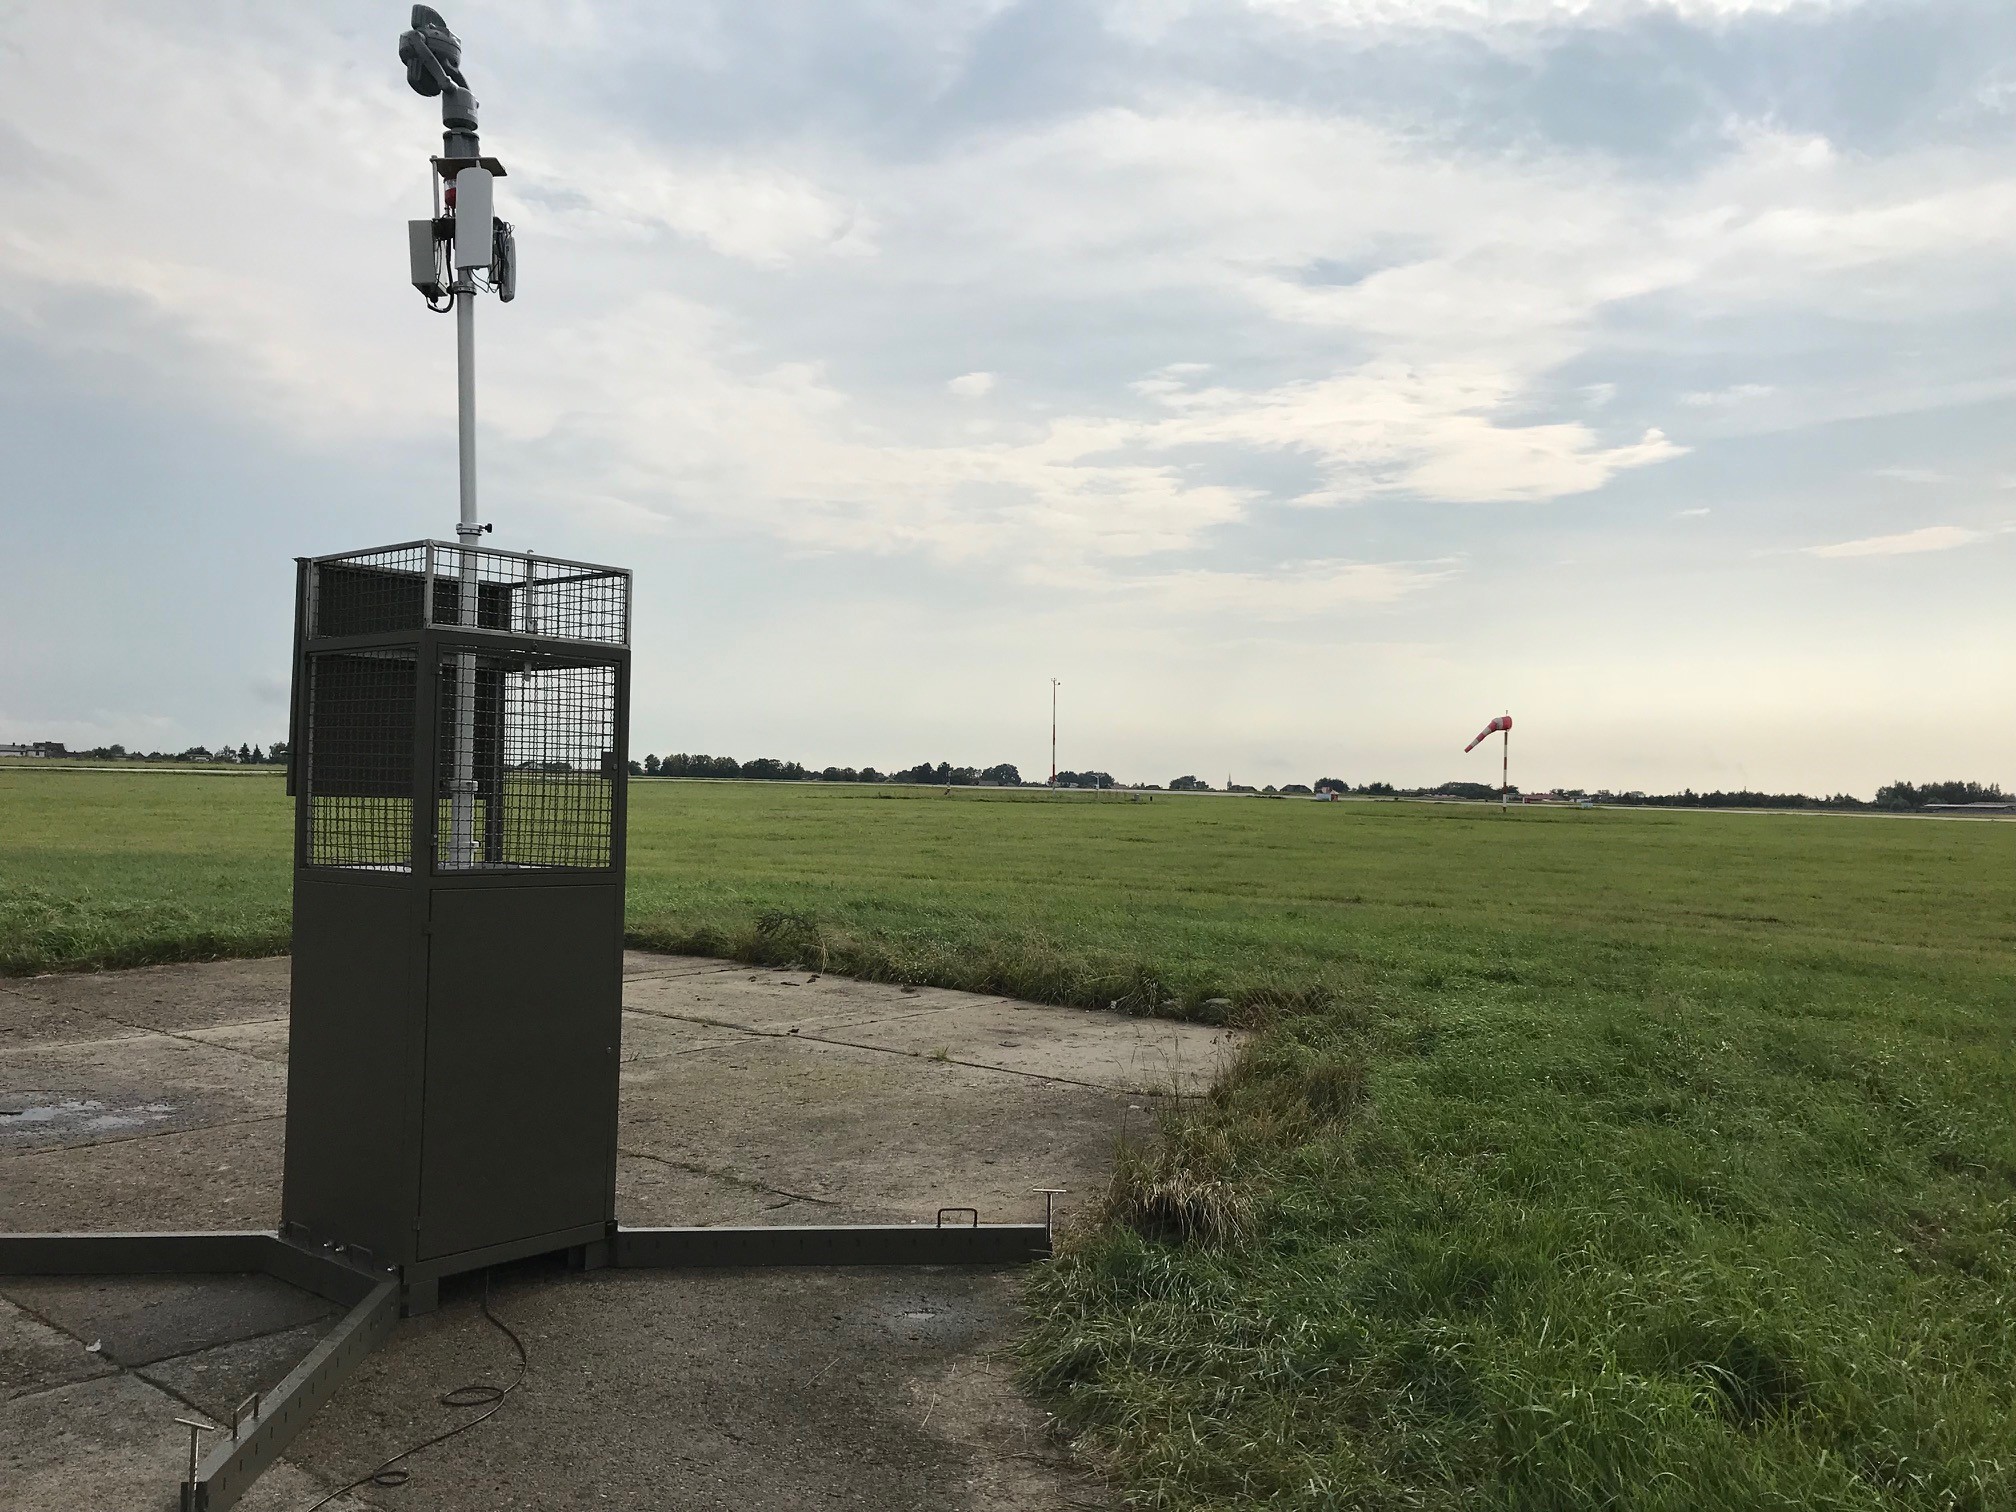 Mobile observation towers